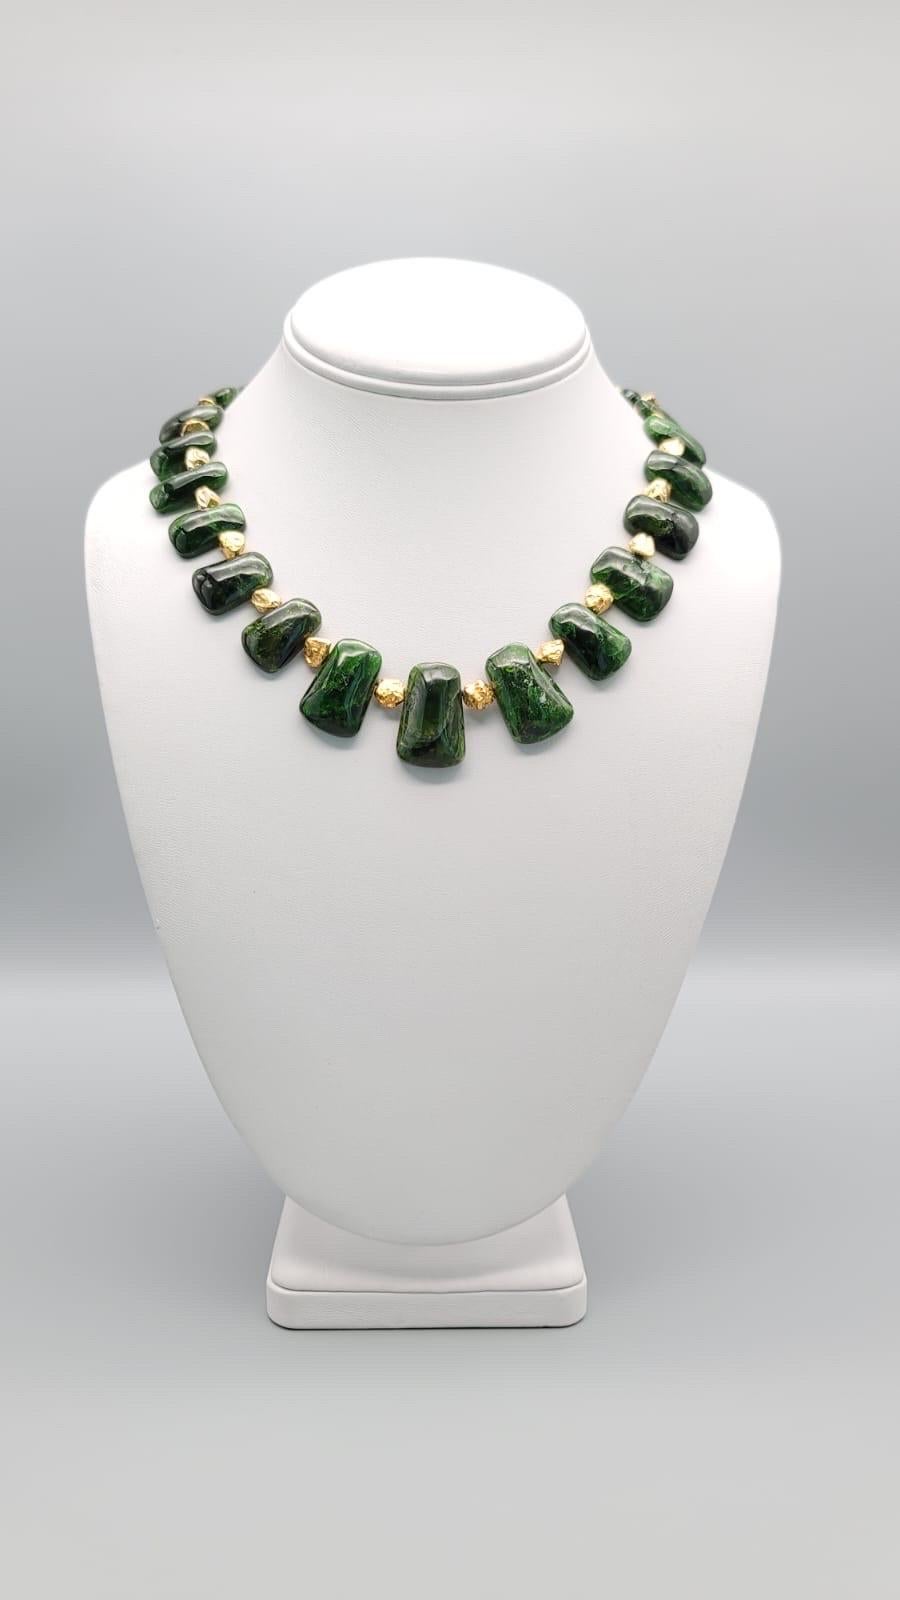 A.Jeschel Richly colored Chrome Diopside necklace 1